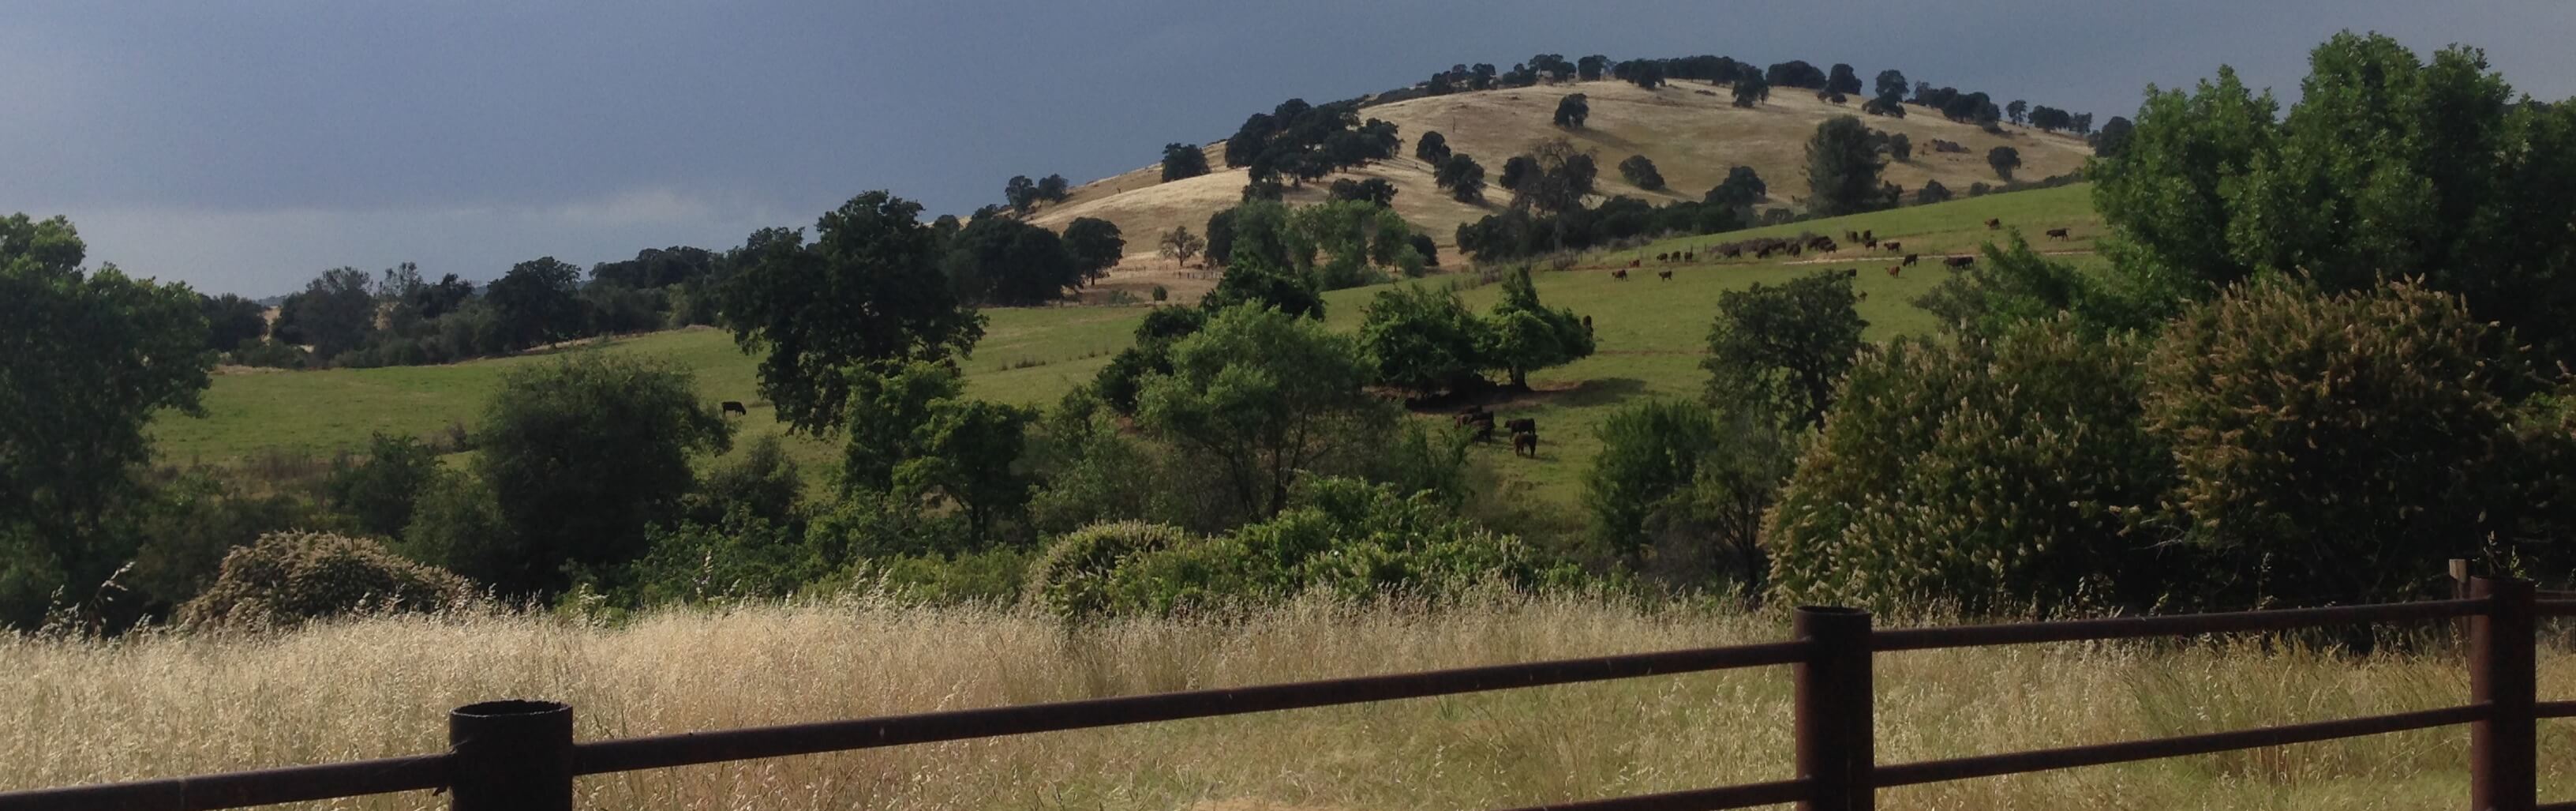 Sierra Foothills Research and Extension Center Cows